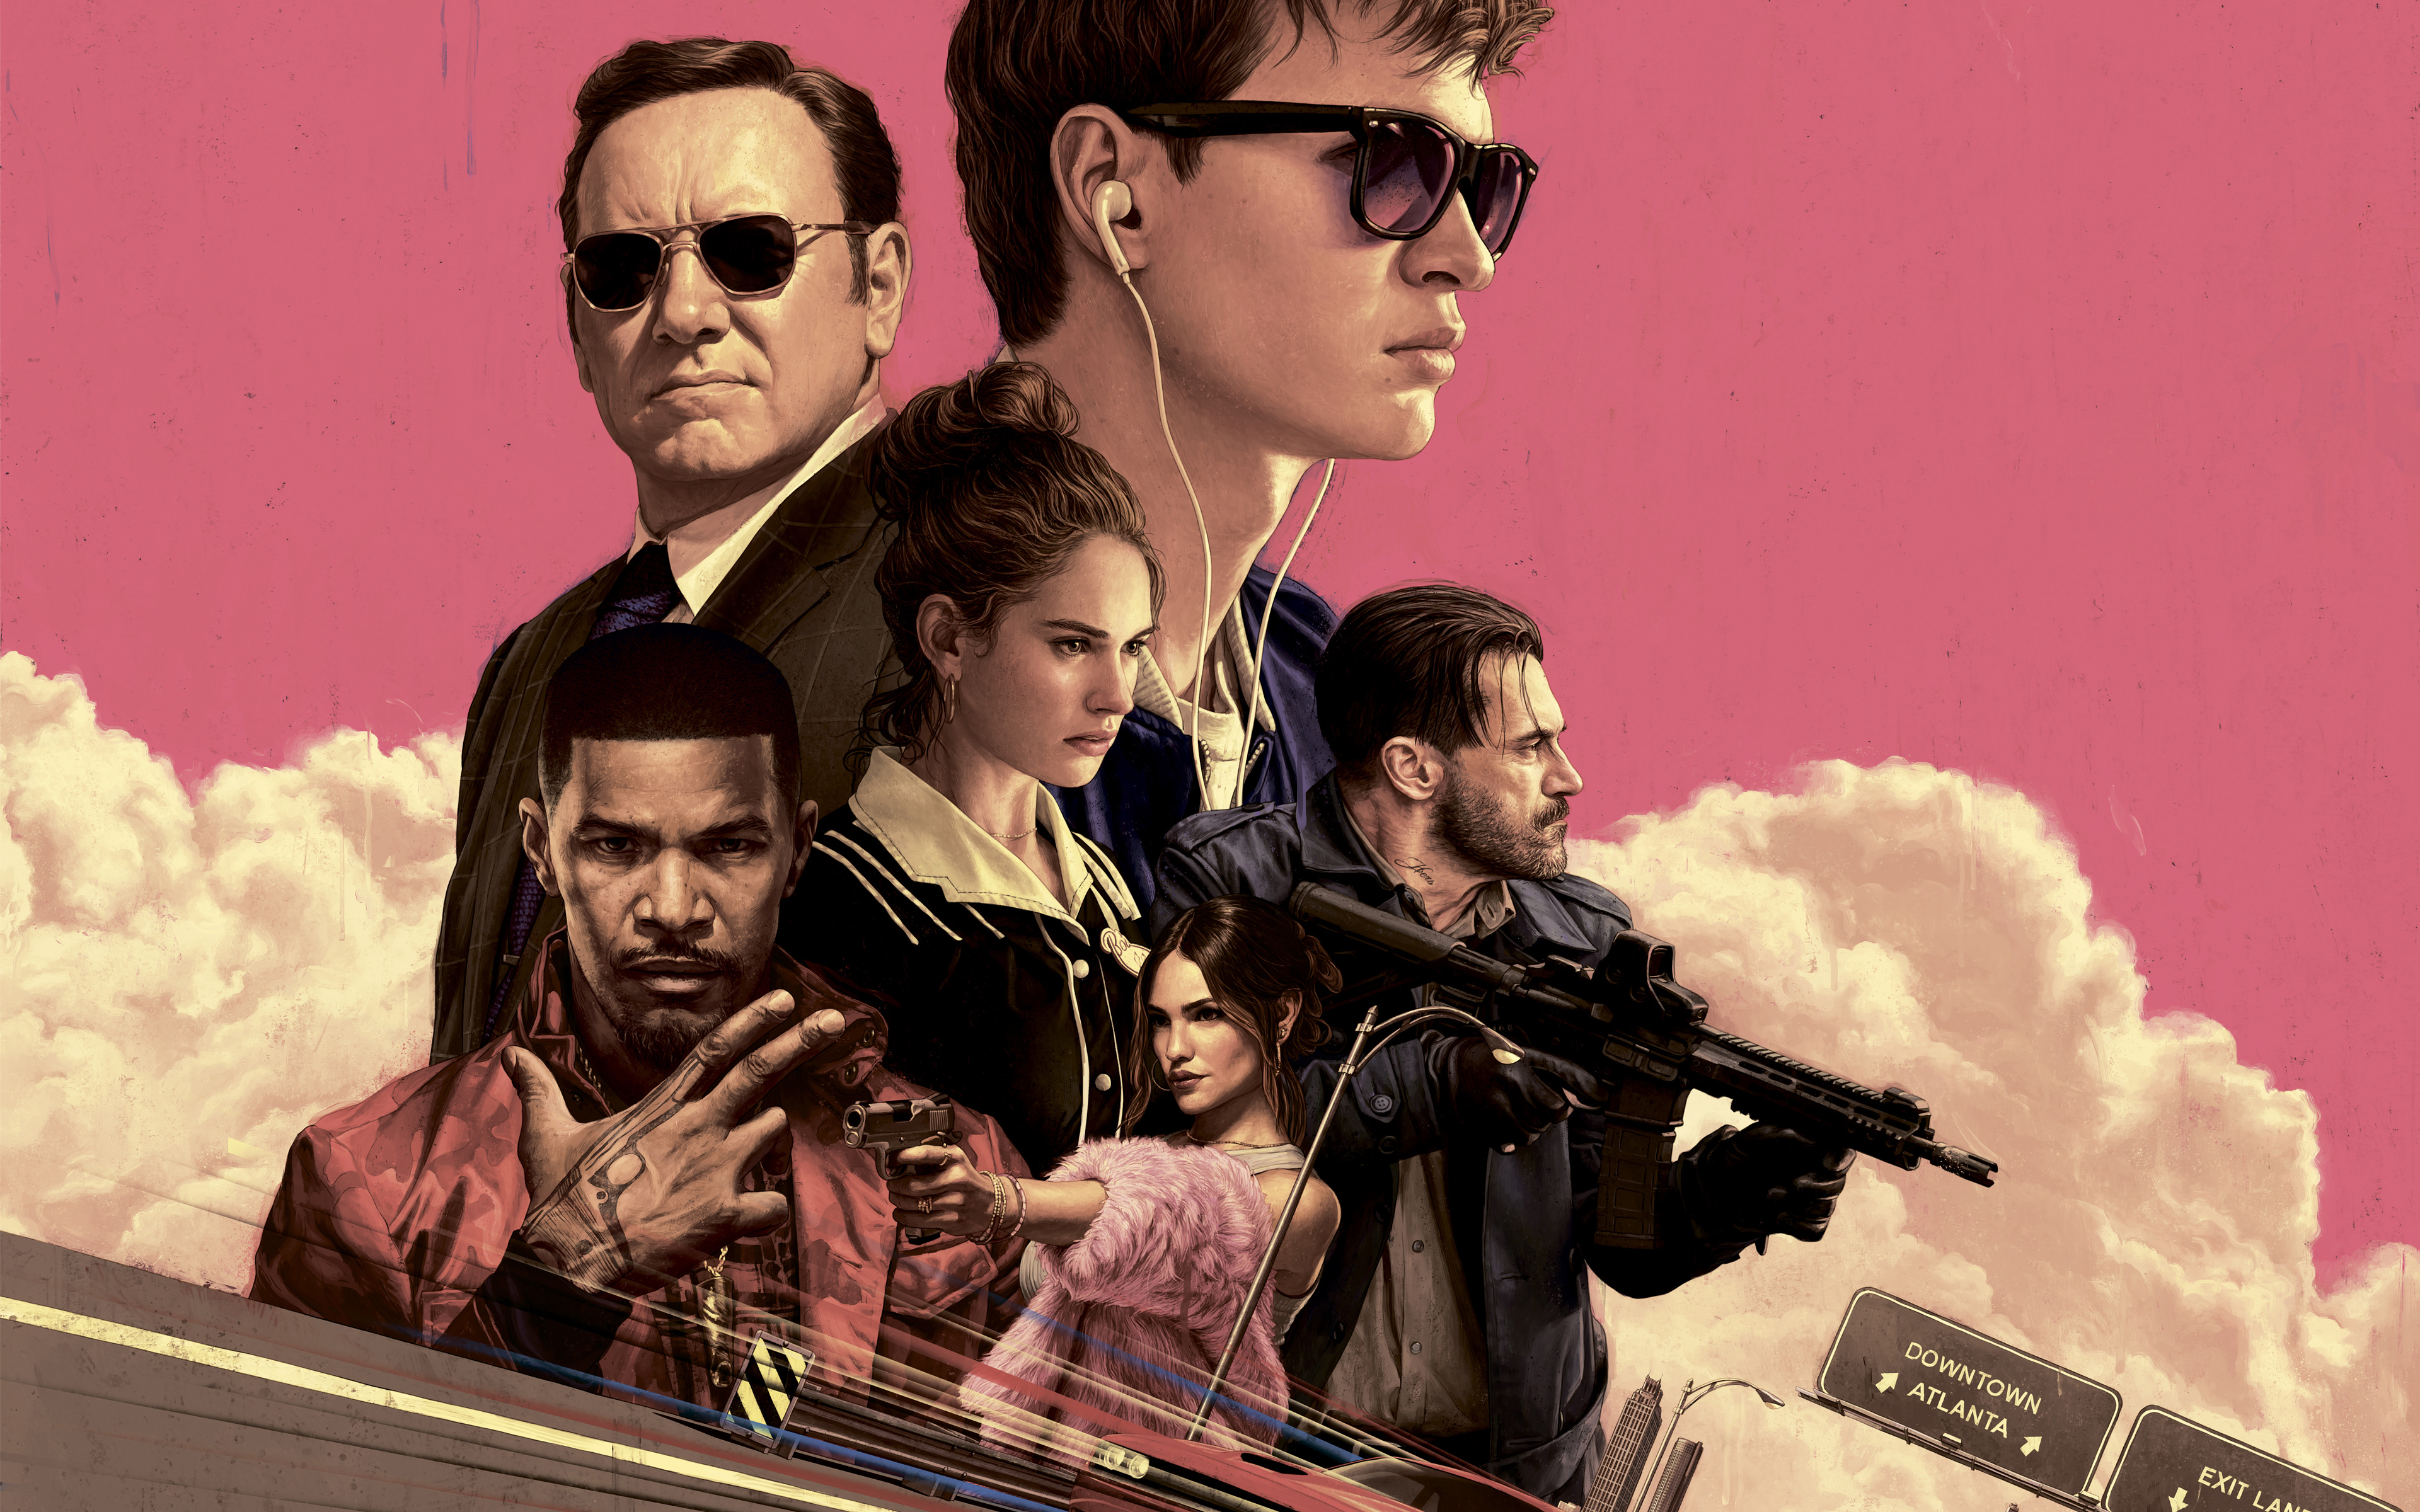 Does Baby Driver Live Up to the Hype?